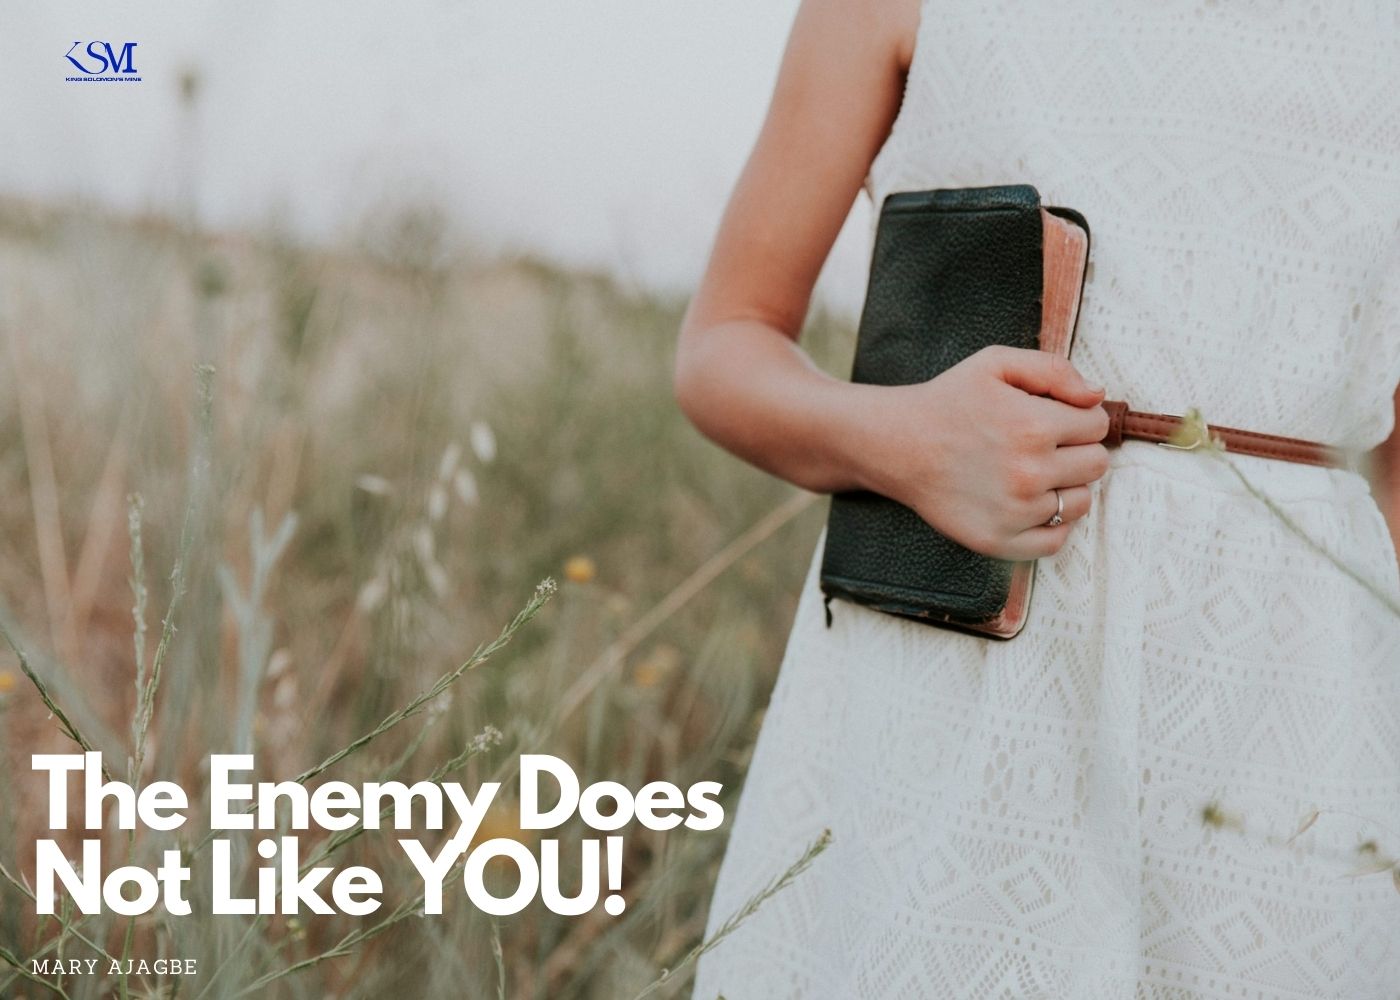 The Enemy Does Not Like You!